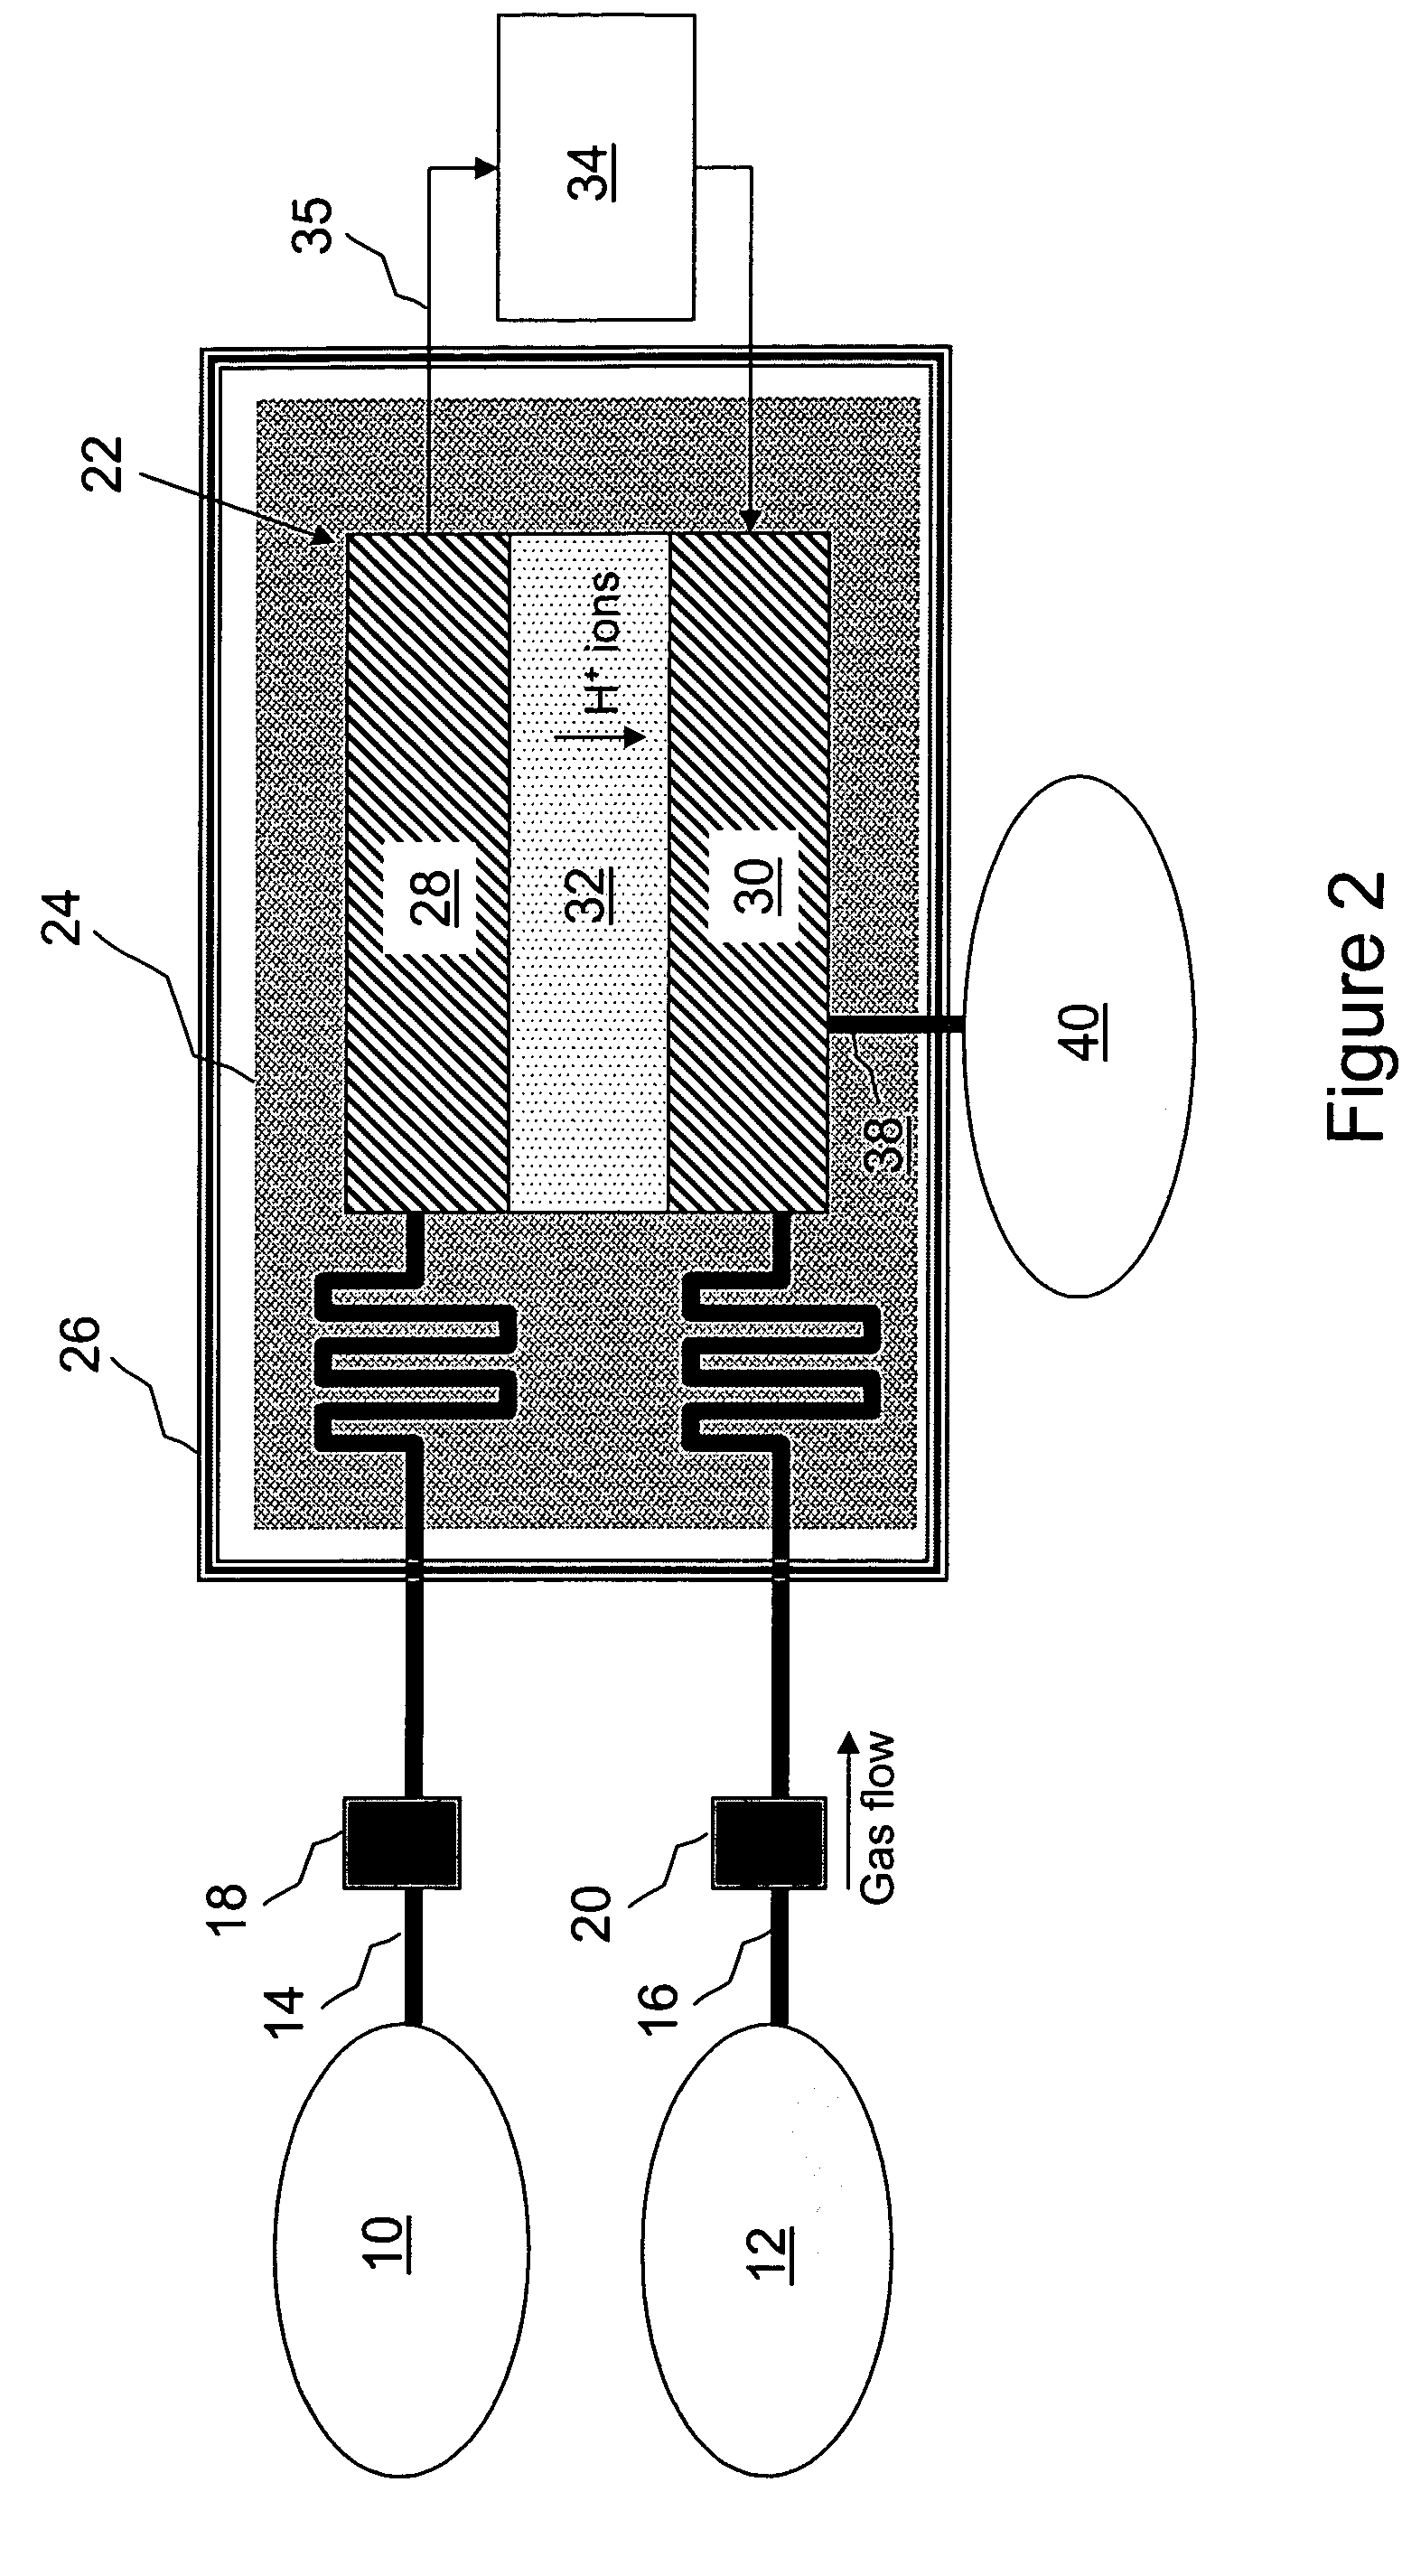 Methods of heating energy storage devices that power downhole tools